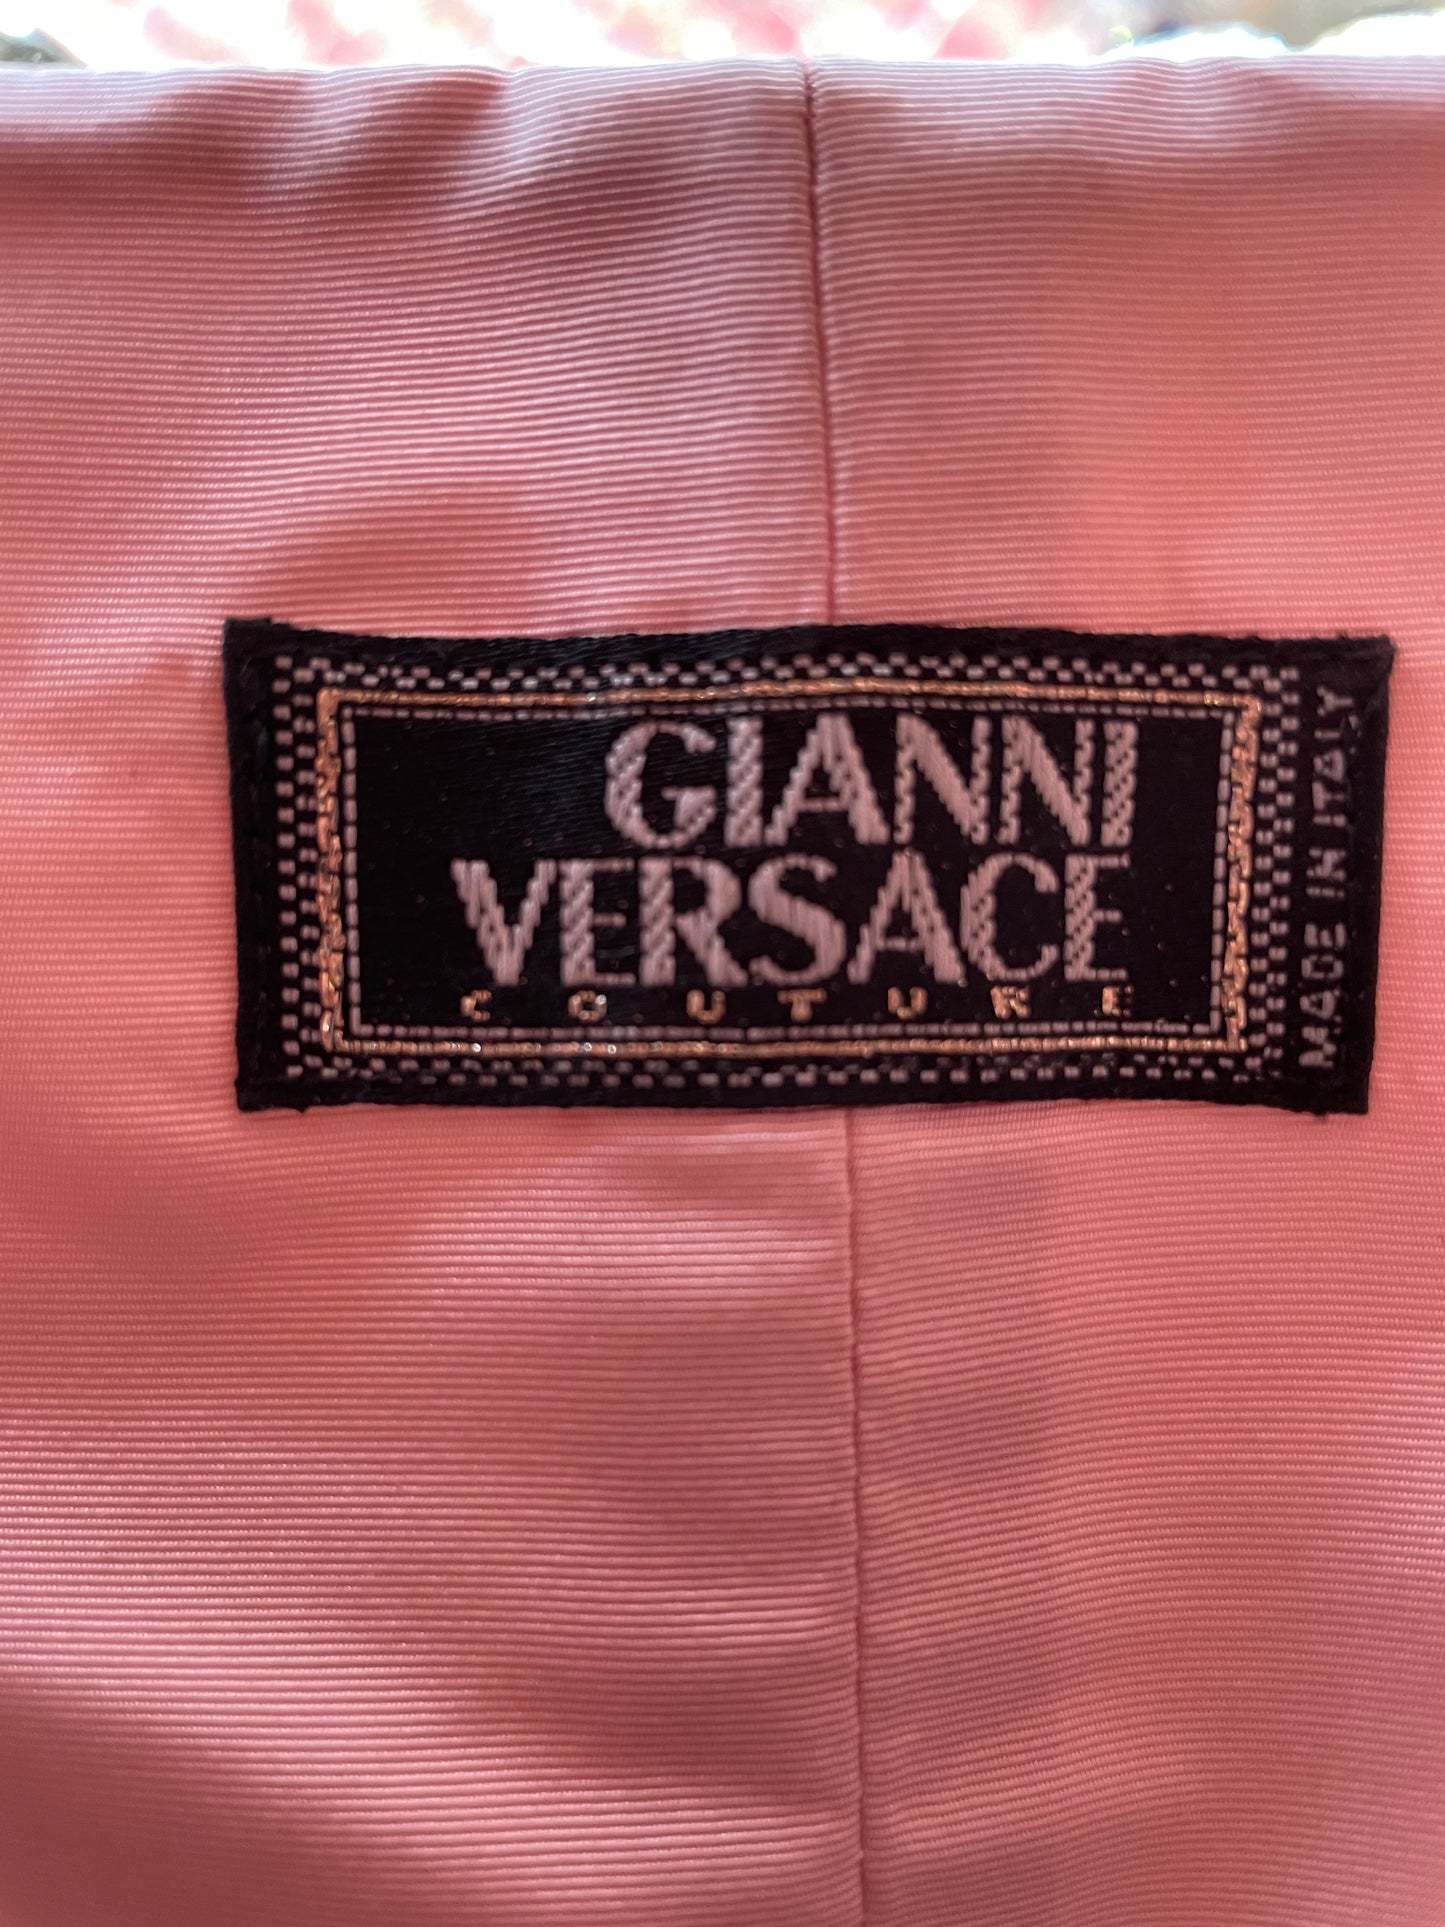 Gianni Versace Couture Bustier & Skirt